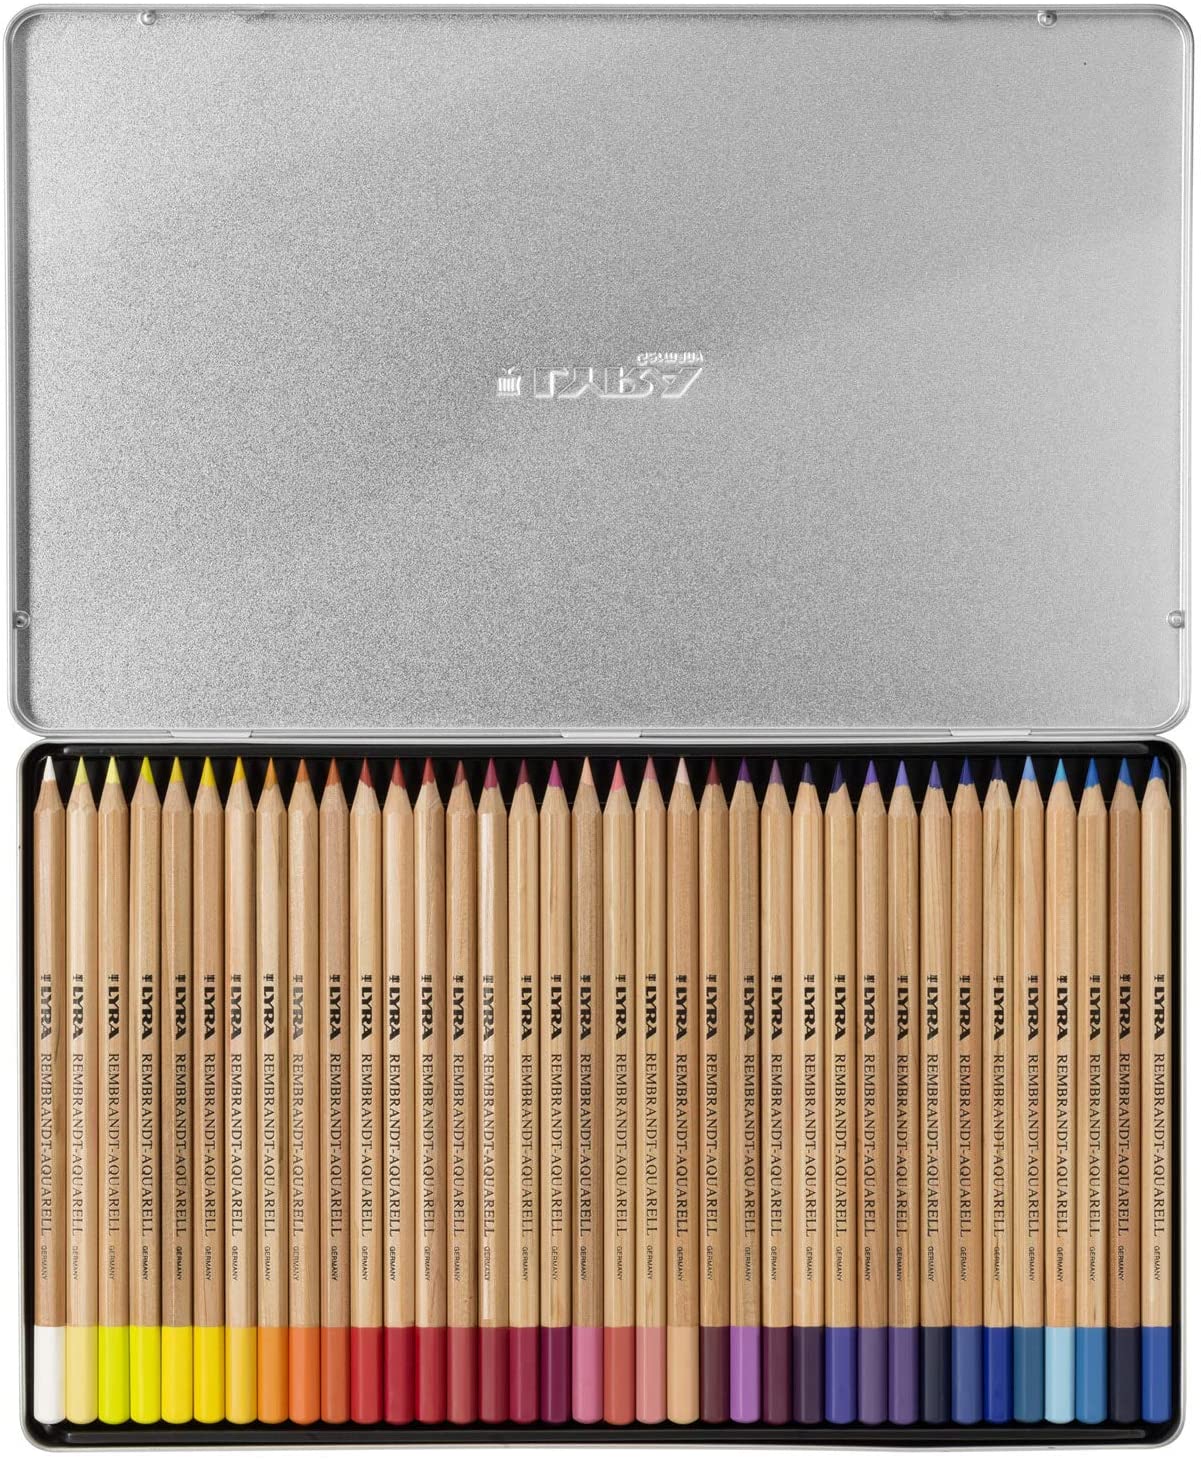 LYRA Rembrandt Aquarell Artists' Colored Pencils steel case opened